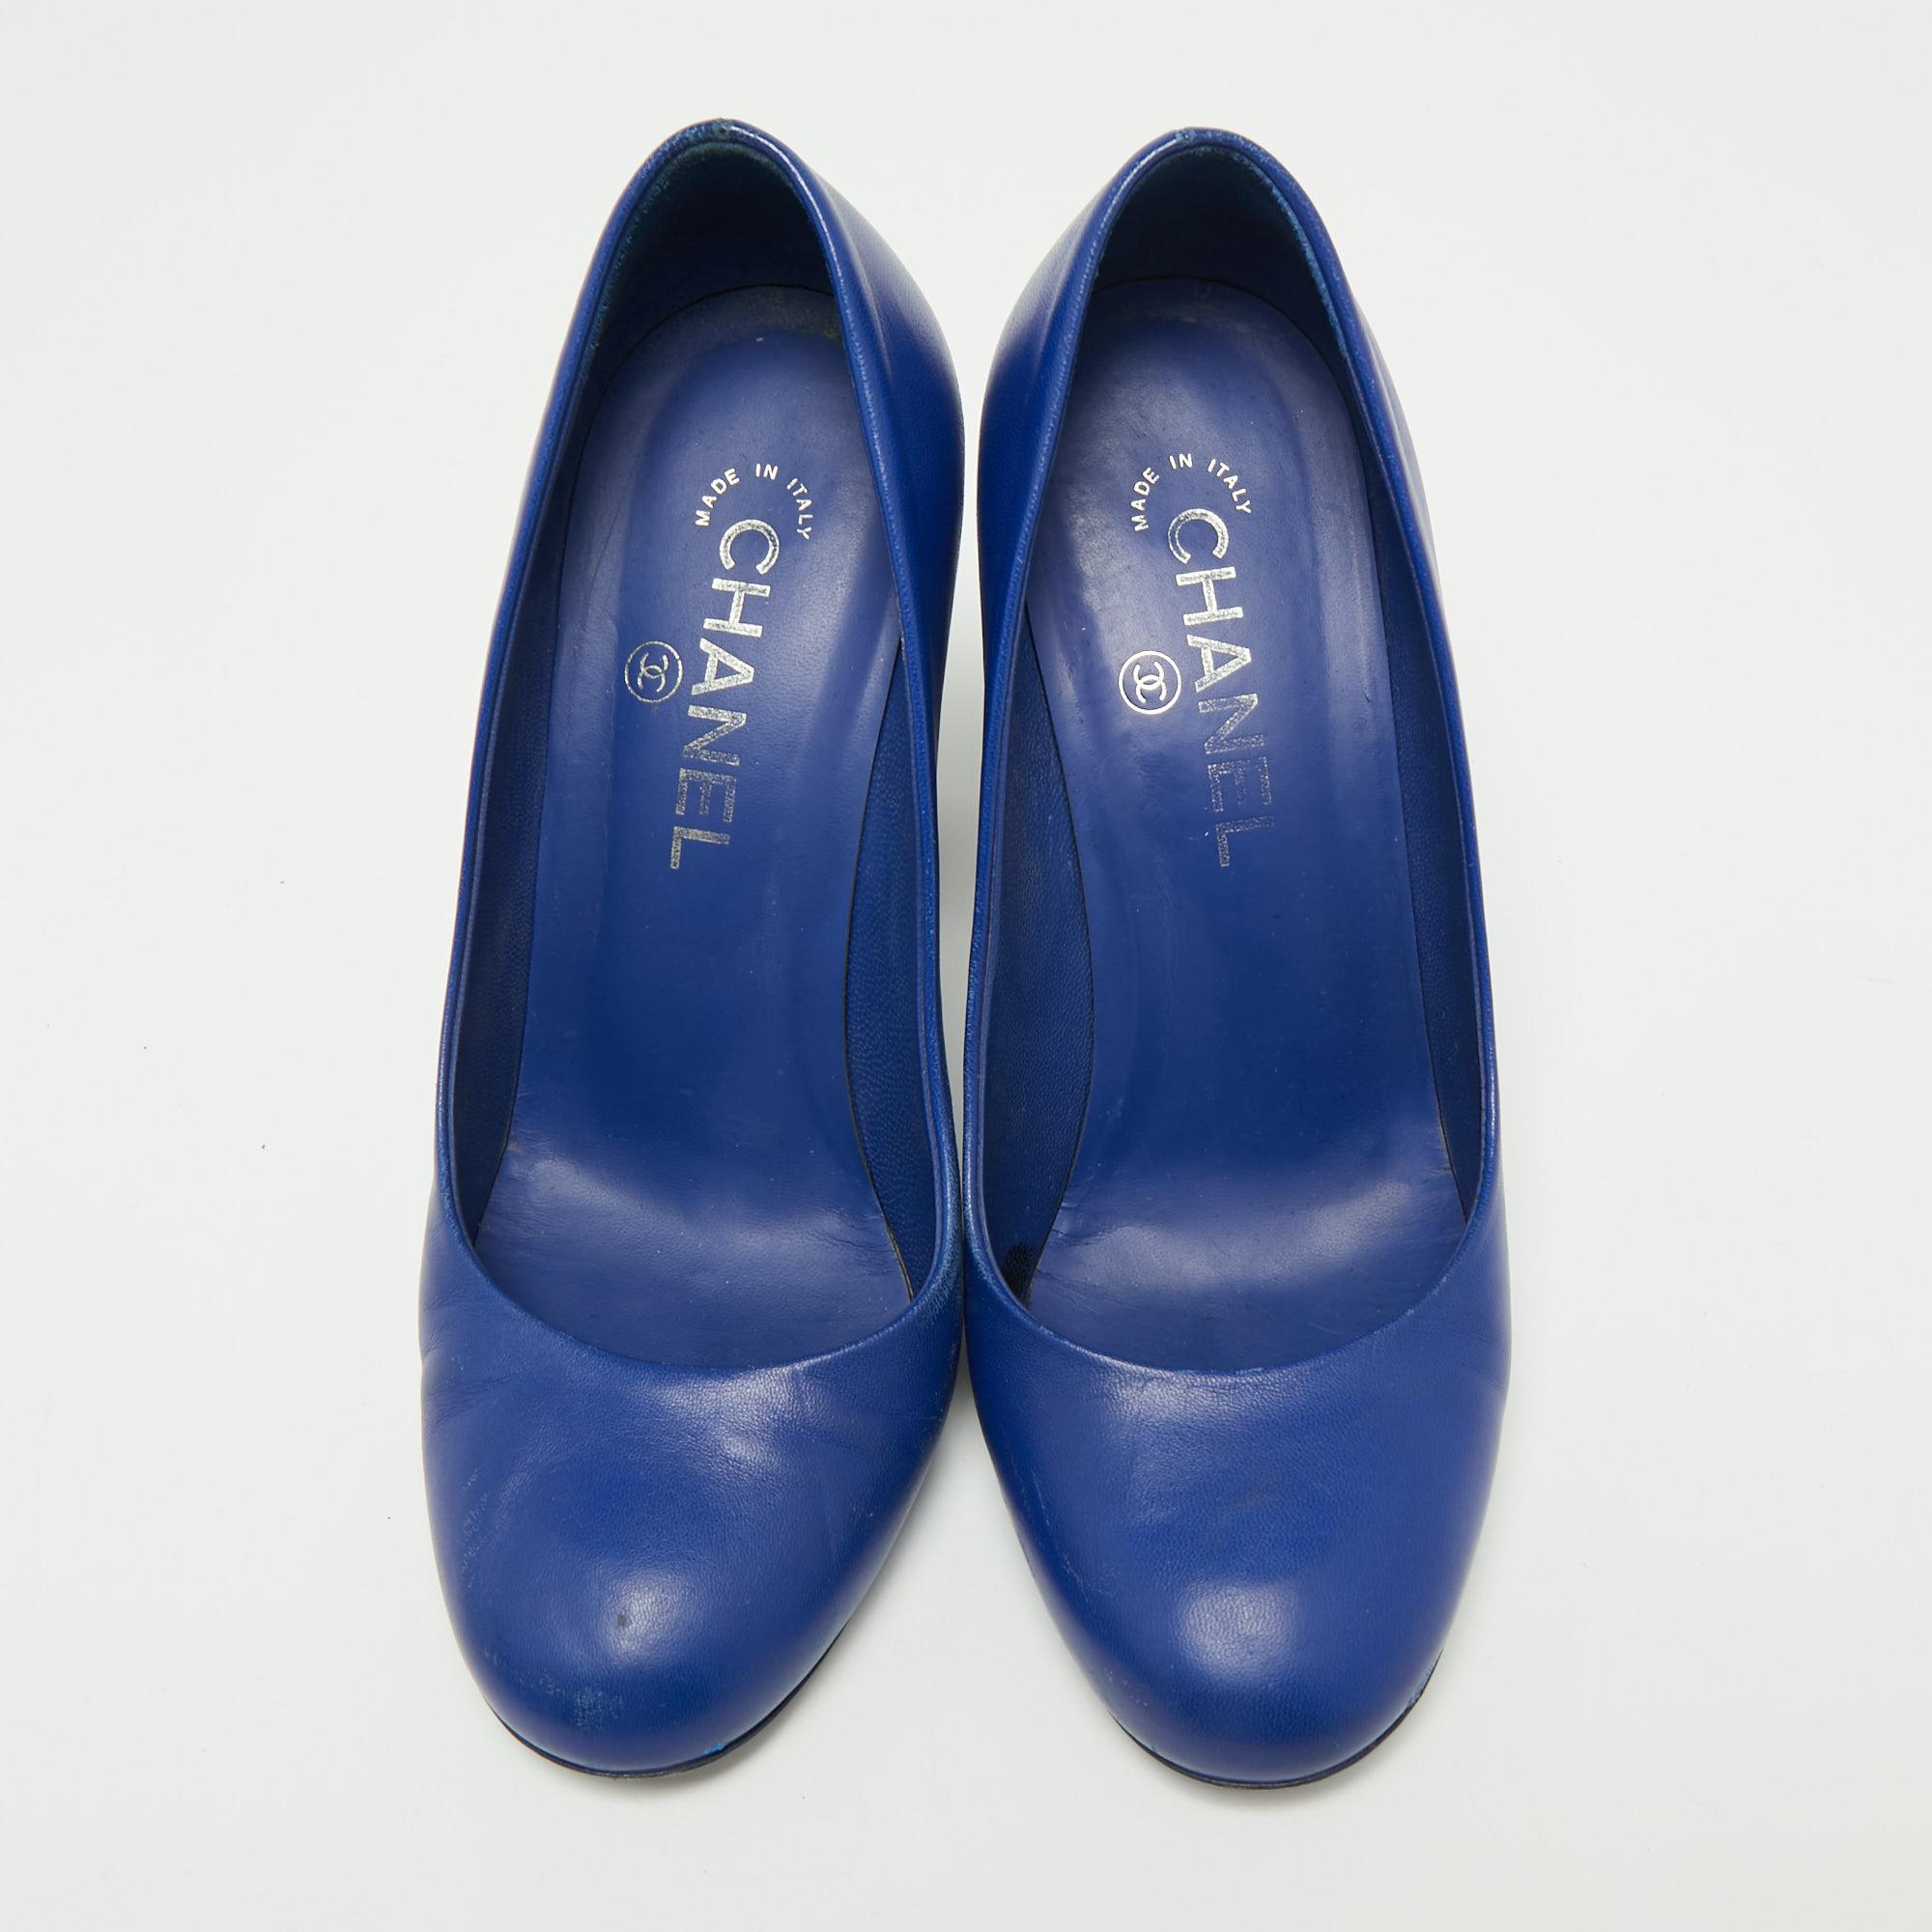 Chanel brings to your closet these exquisite pumps made skillfully from leather. The lovely blue pumps flaunt super-stylish, logo-detailed block heels that add an artistic touch to the simple silhouette. They are finished with smooth insoles and